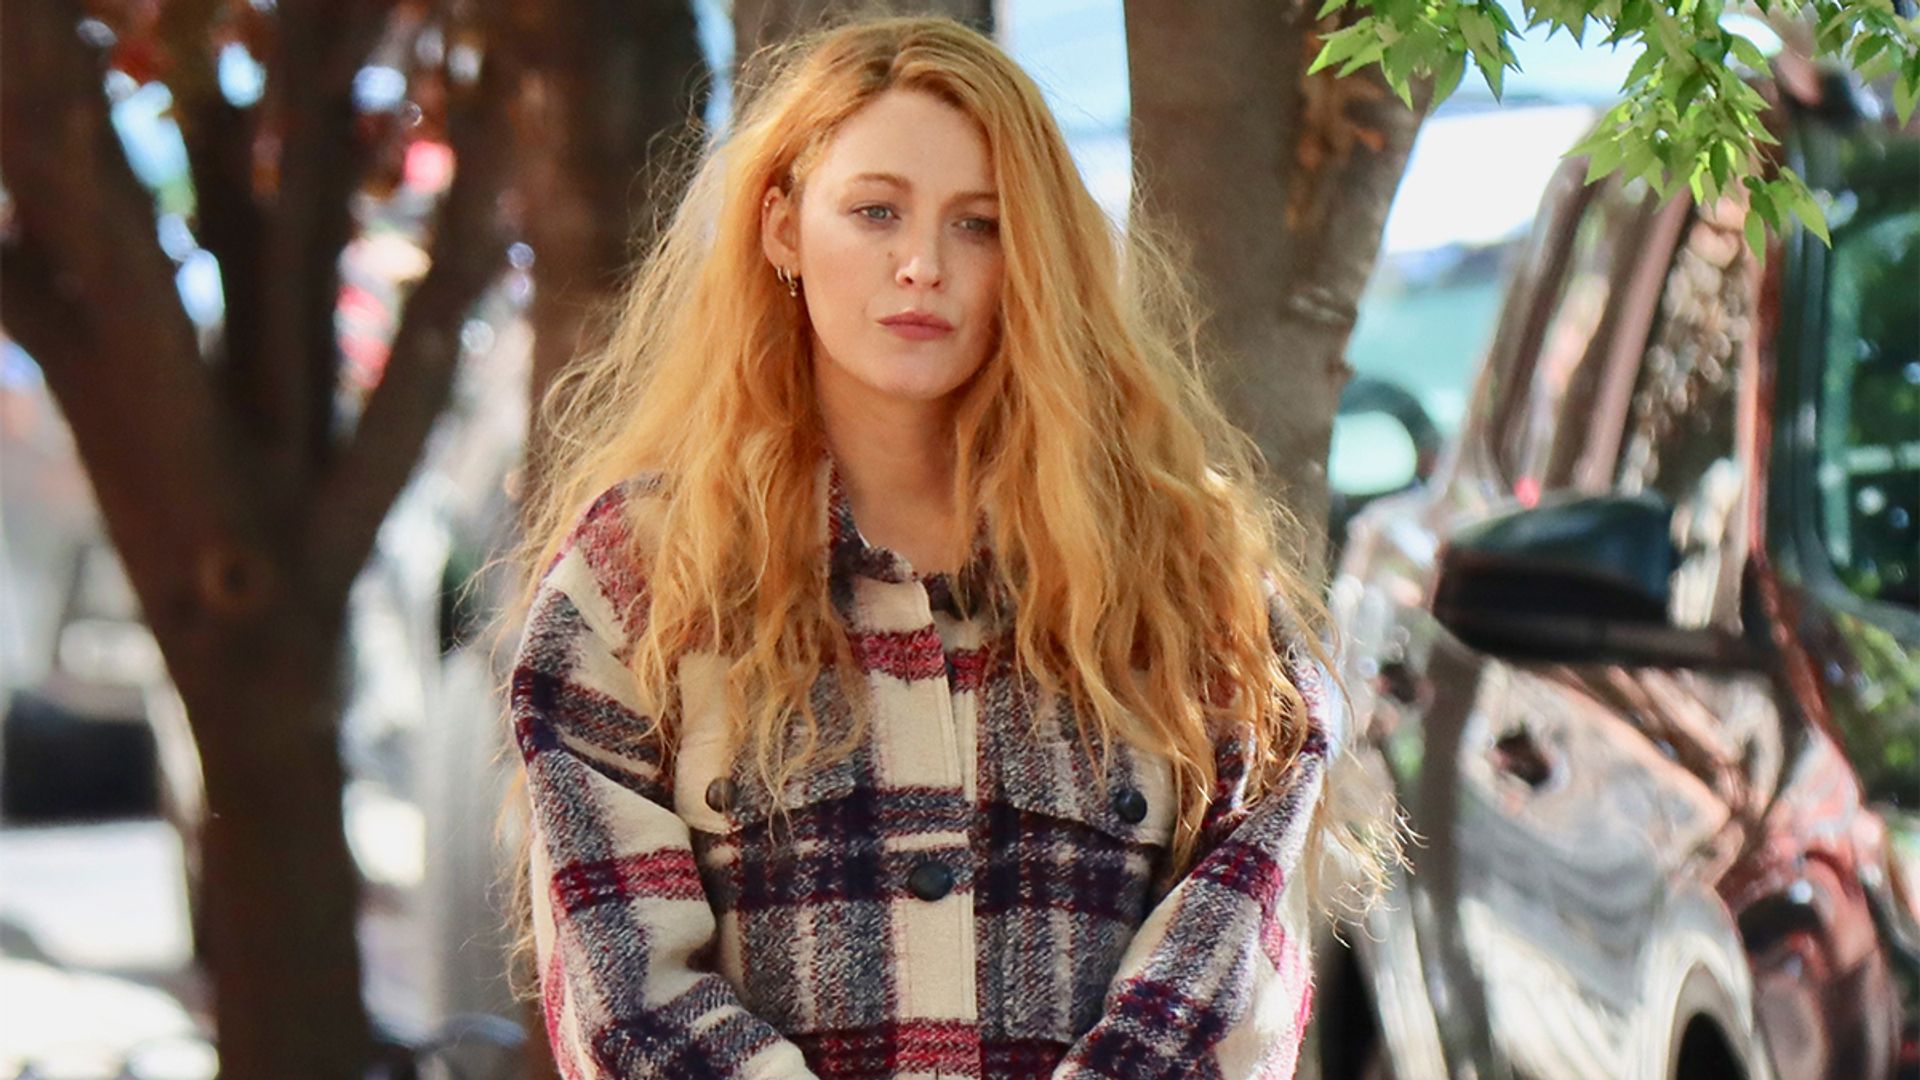 Blake Lively looks lovely in plaid as she returns to work 